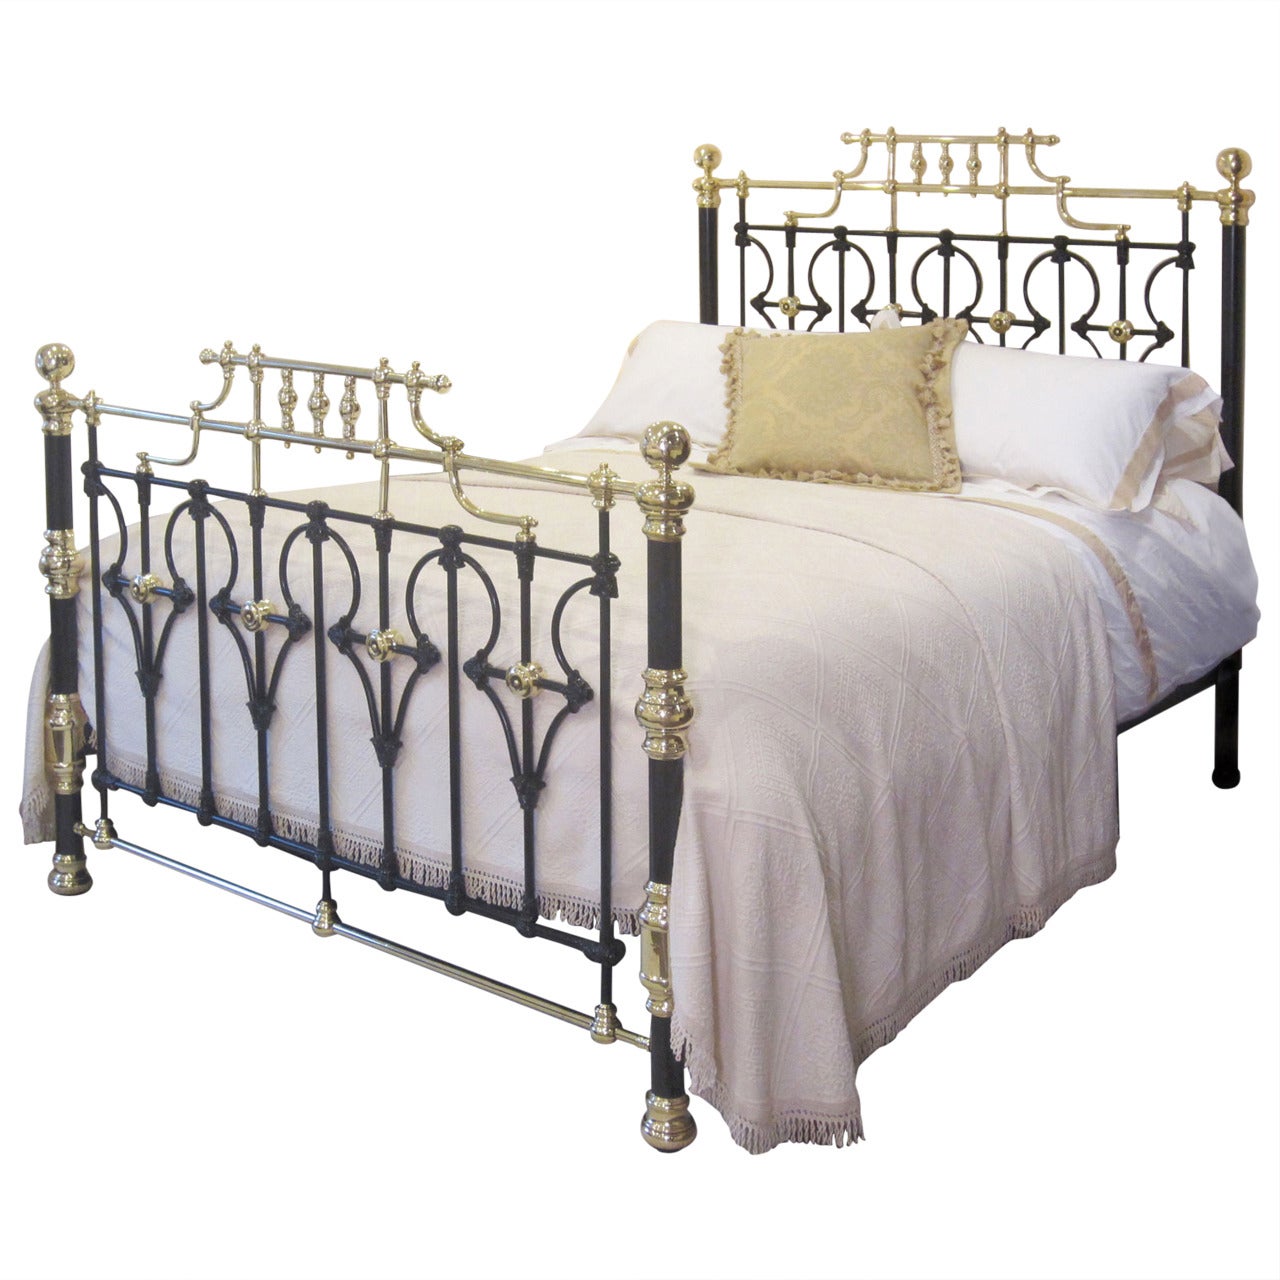 Decorative Brass and Iron Bedstead